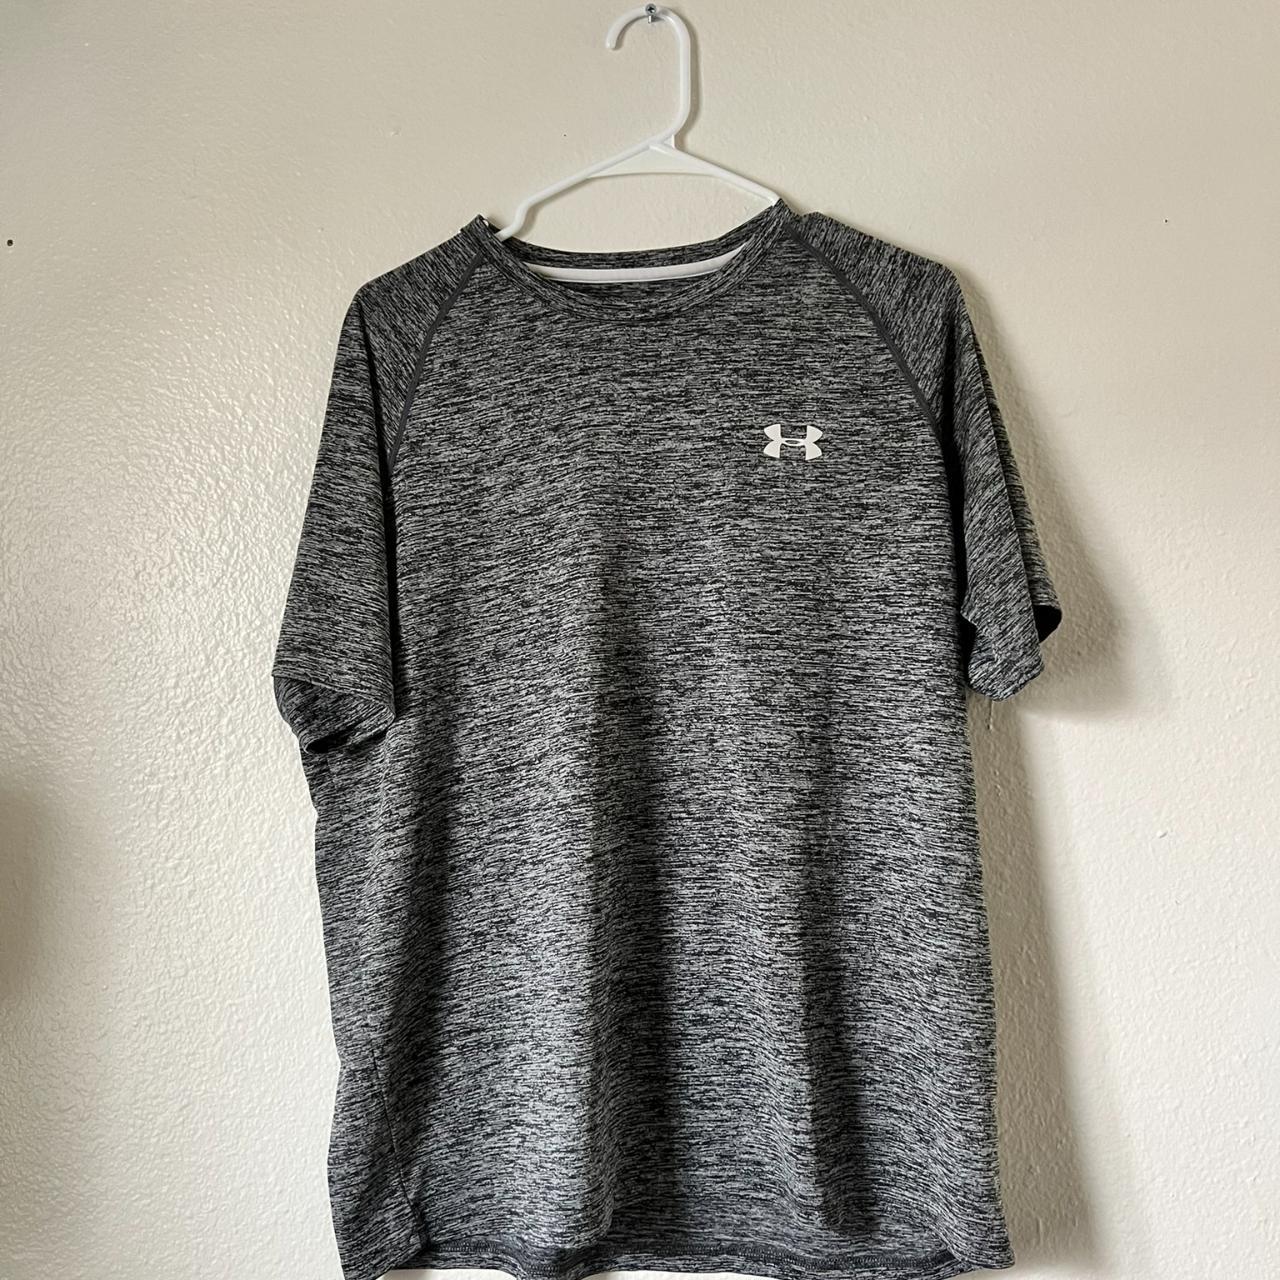 Men's UnderArmour workout top - like new, comes from... - Depop